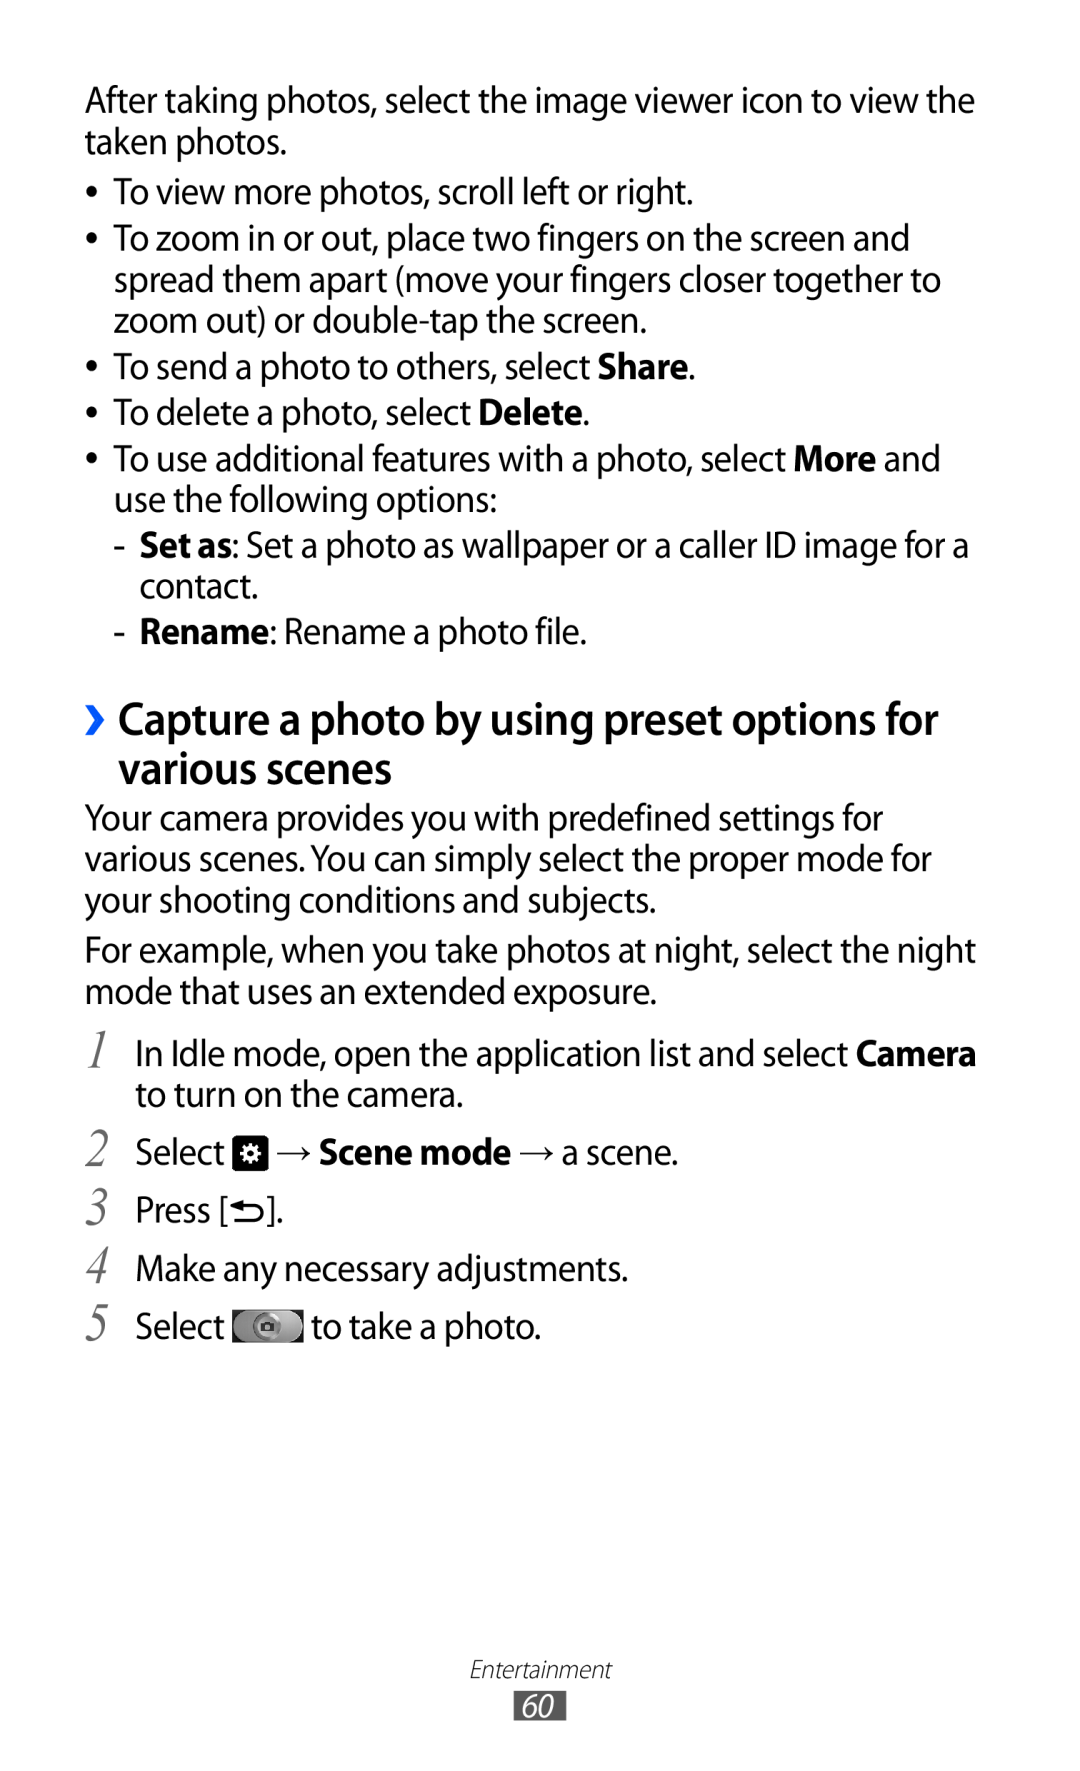 Samsung GT-I9070 ››Capture a photo by using preset options for various scenes, Select → Scene mode → a scene. Press 